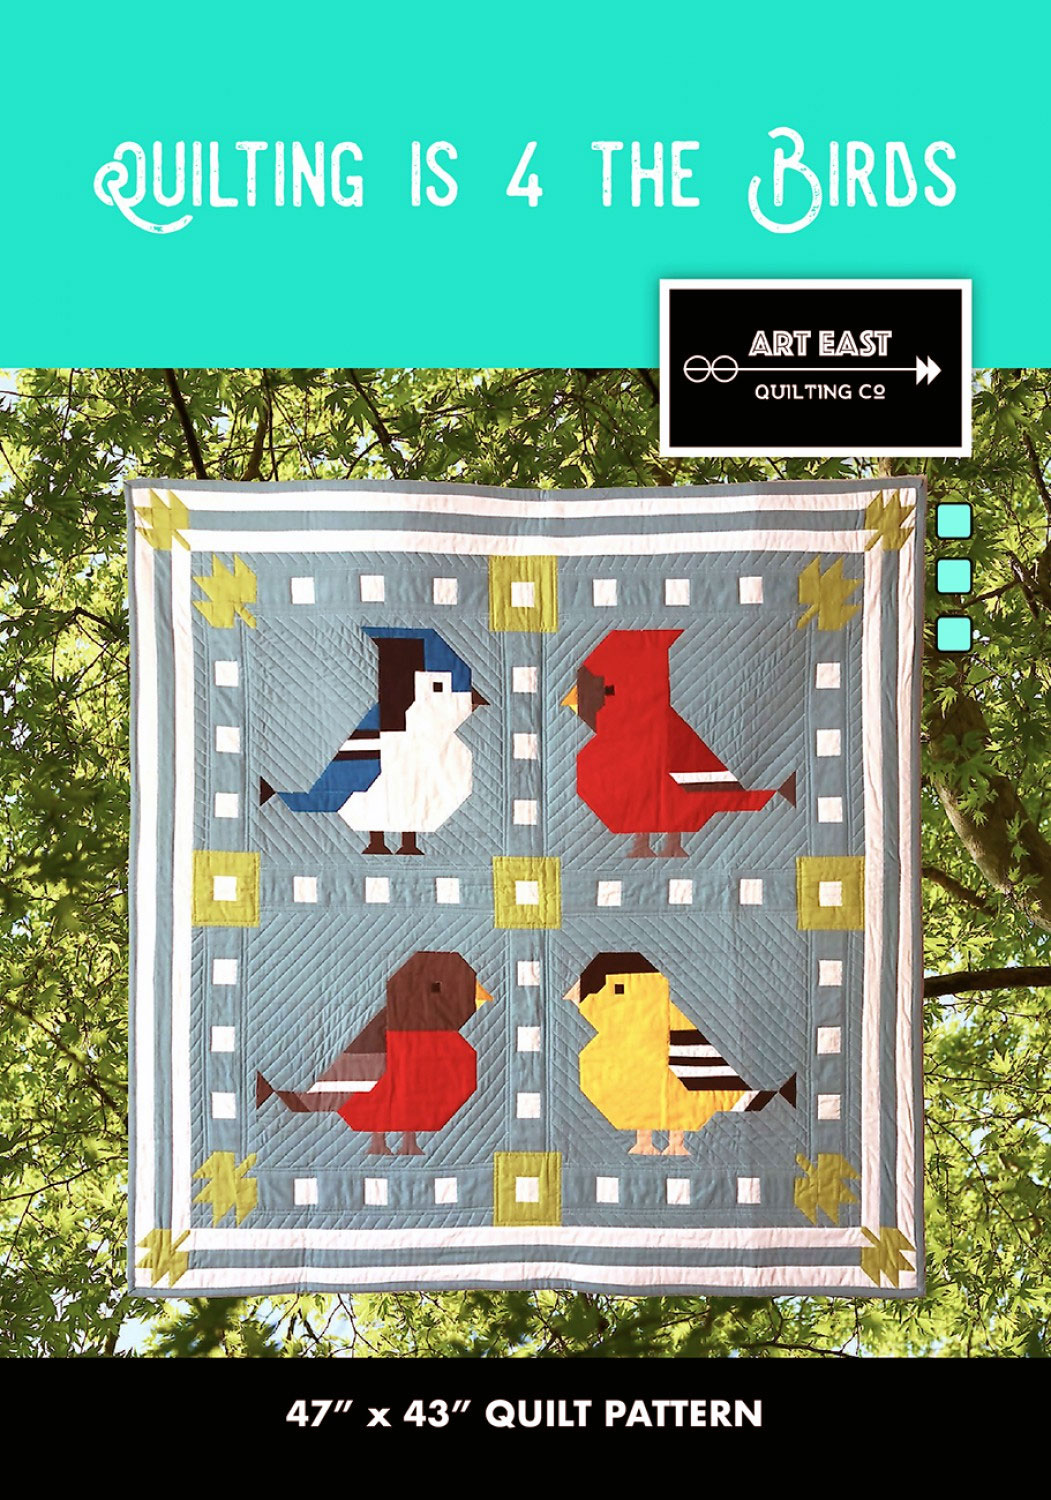 Quilting-is-4-the-Birds-sewing-pattern-Art-East-Quilting-Co-front